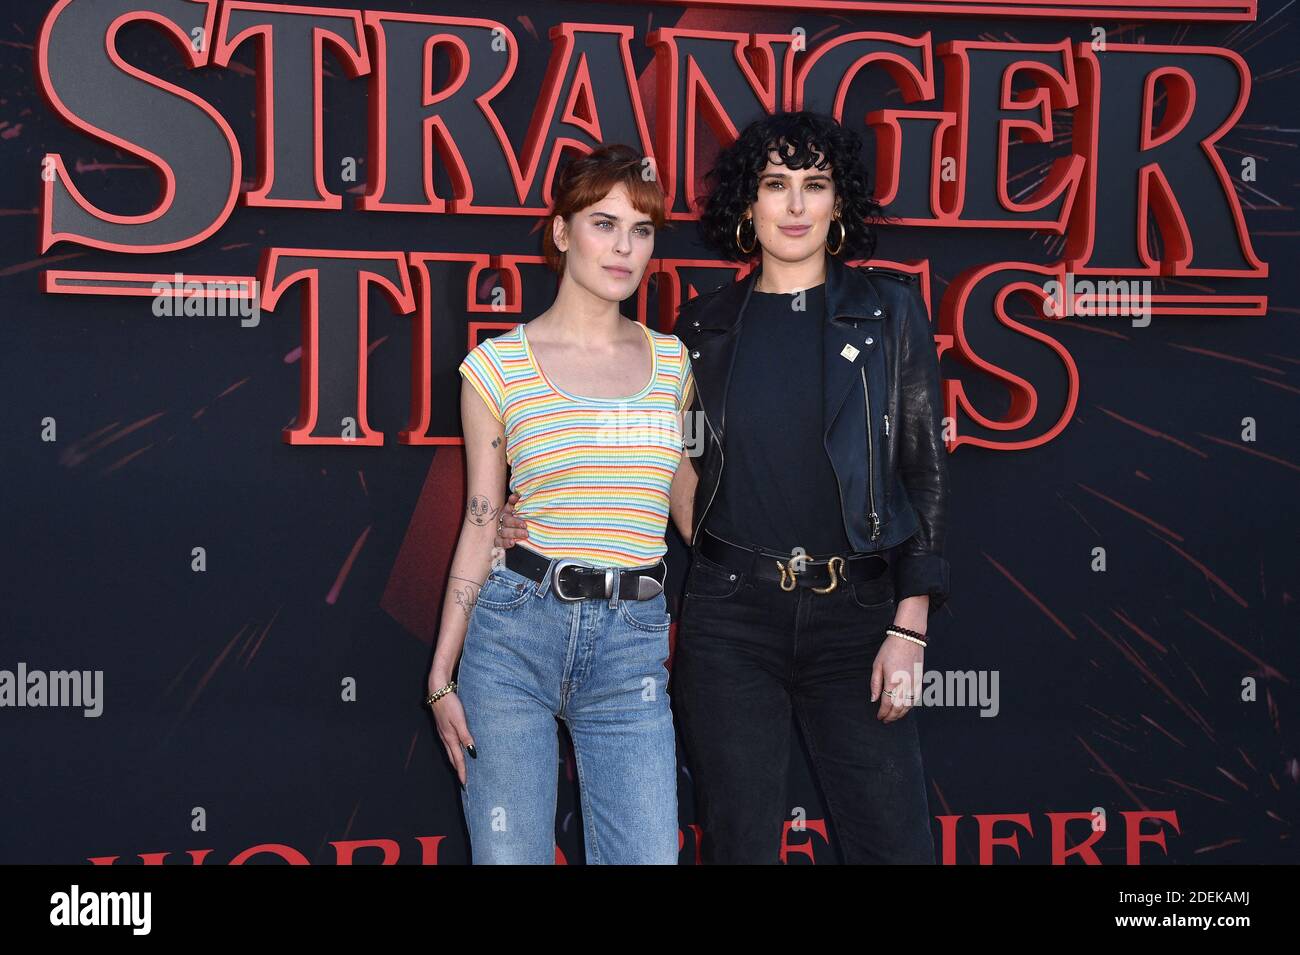 Tallulah Willis and Rumer Willis attend the premiere of Netflix's "Stranger  Things" Season 3 on June 28, 2019 in Santa Monica, CA, USA. Photo by Lionel  Hahn/ABACAPRESS.COM Stock Photo - Alamy